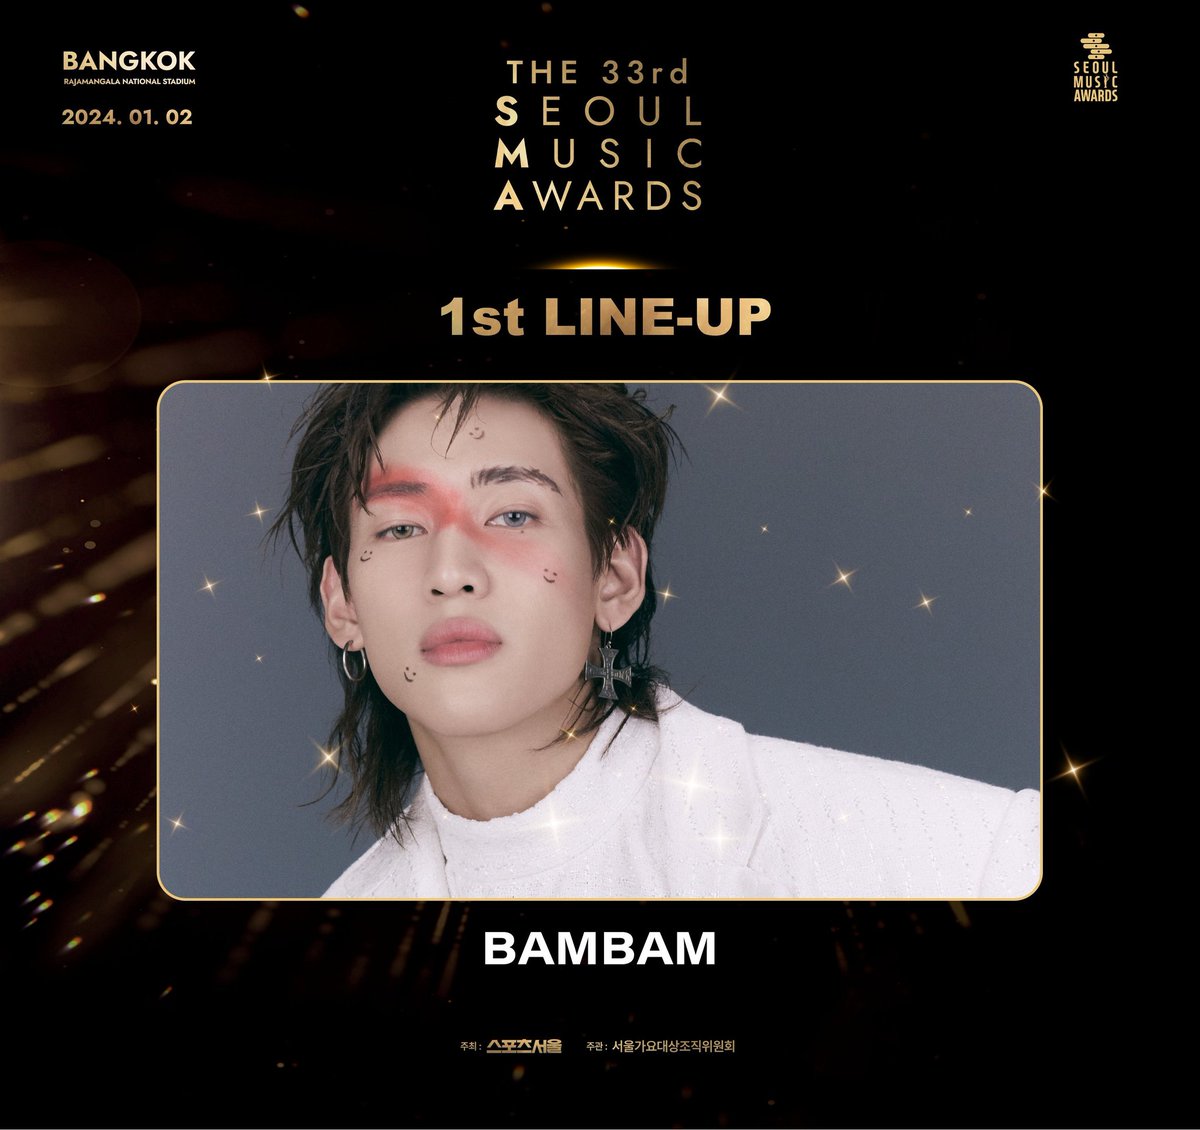 Mark, Youngjae, and BamBam are part of the line-up of the 33rd Seoul Music Awards in Rajamangala Stadium in Bangkok 😭 #GOT7 #갓세븐 @GOT7